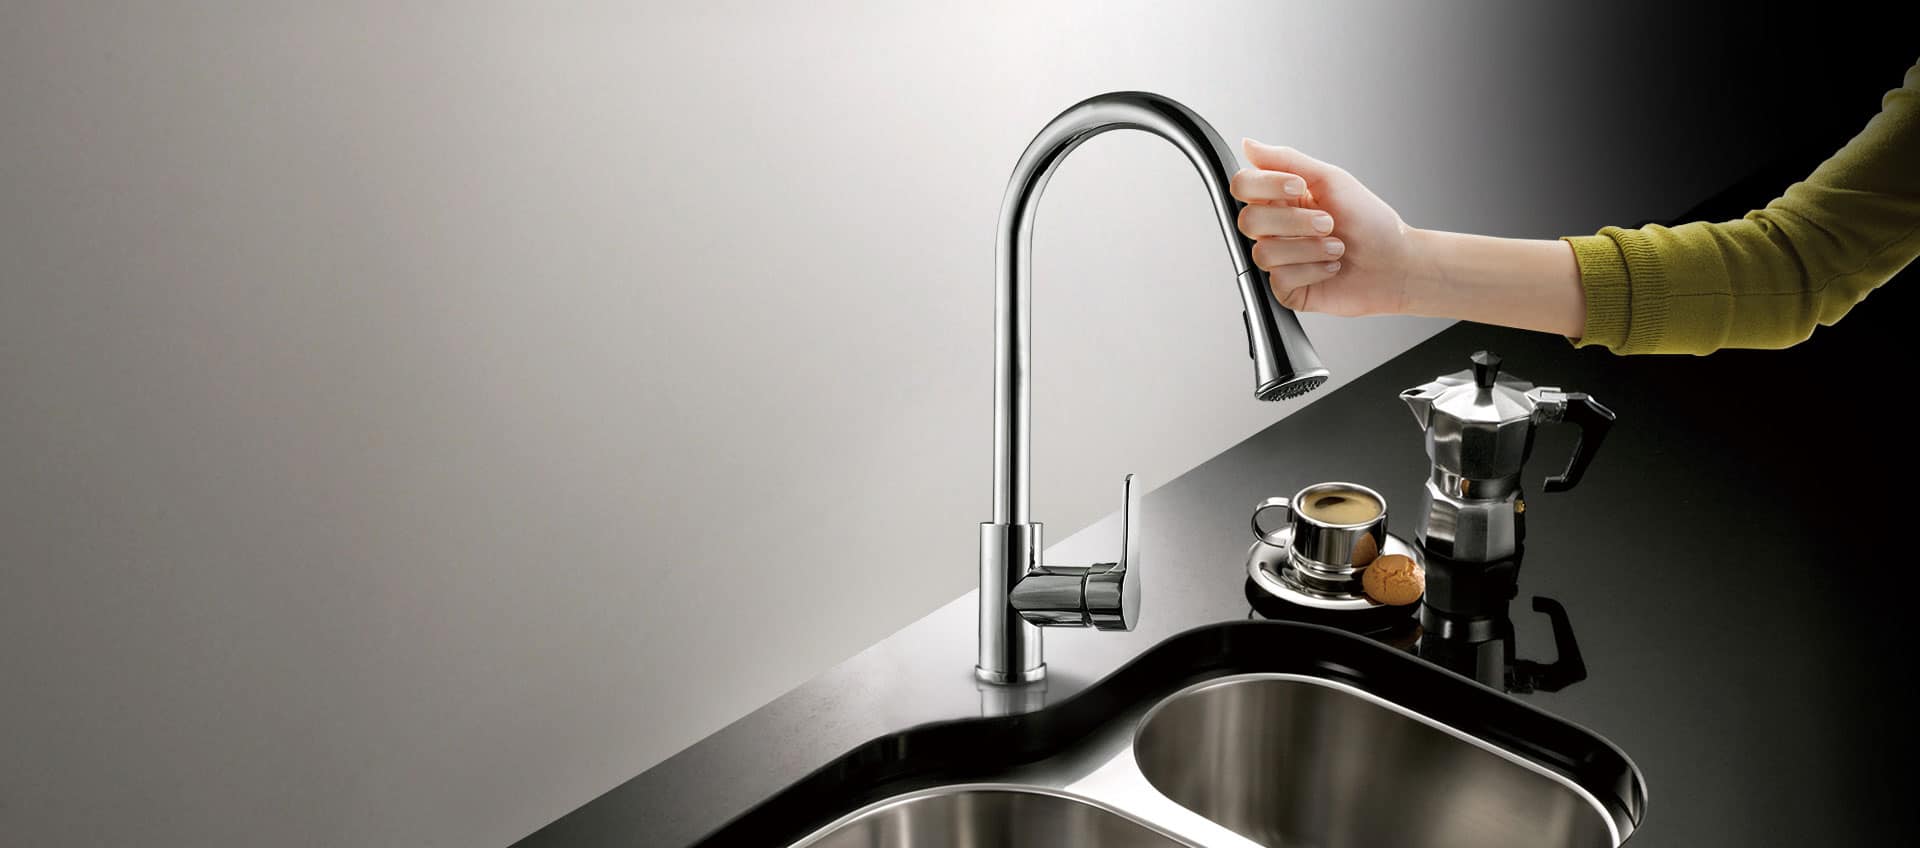 touch sensor kitchen sink faucet pull out